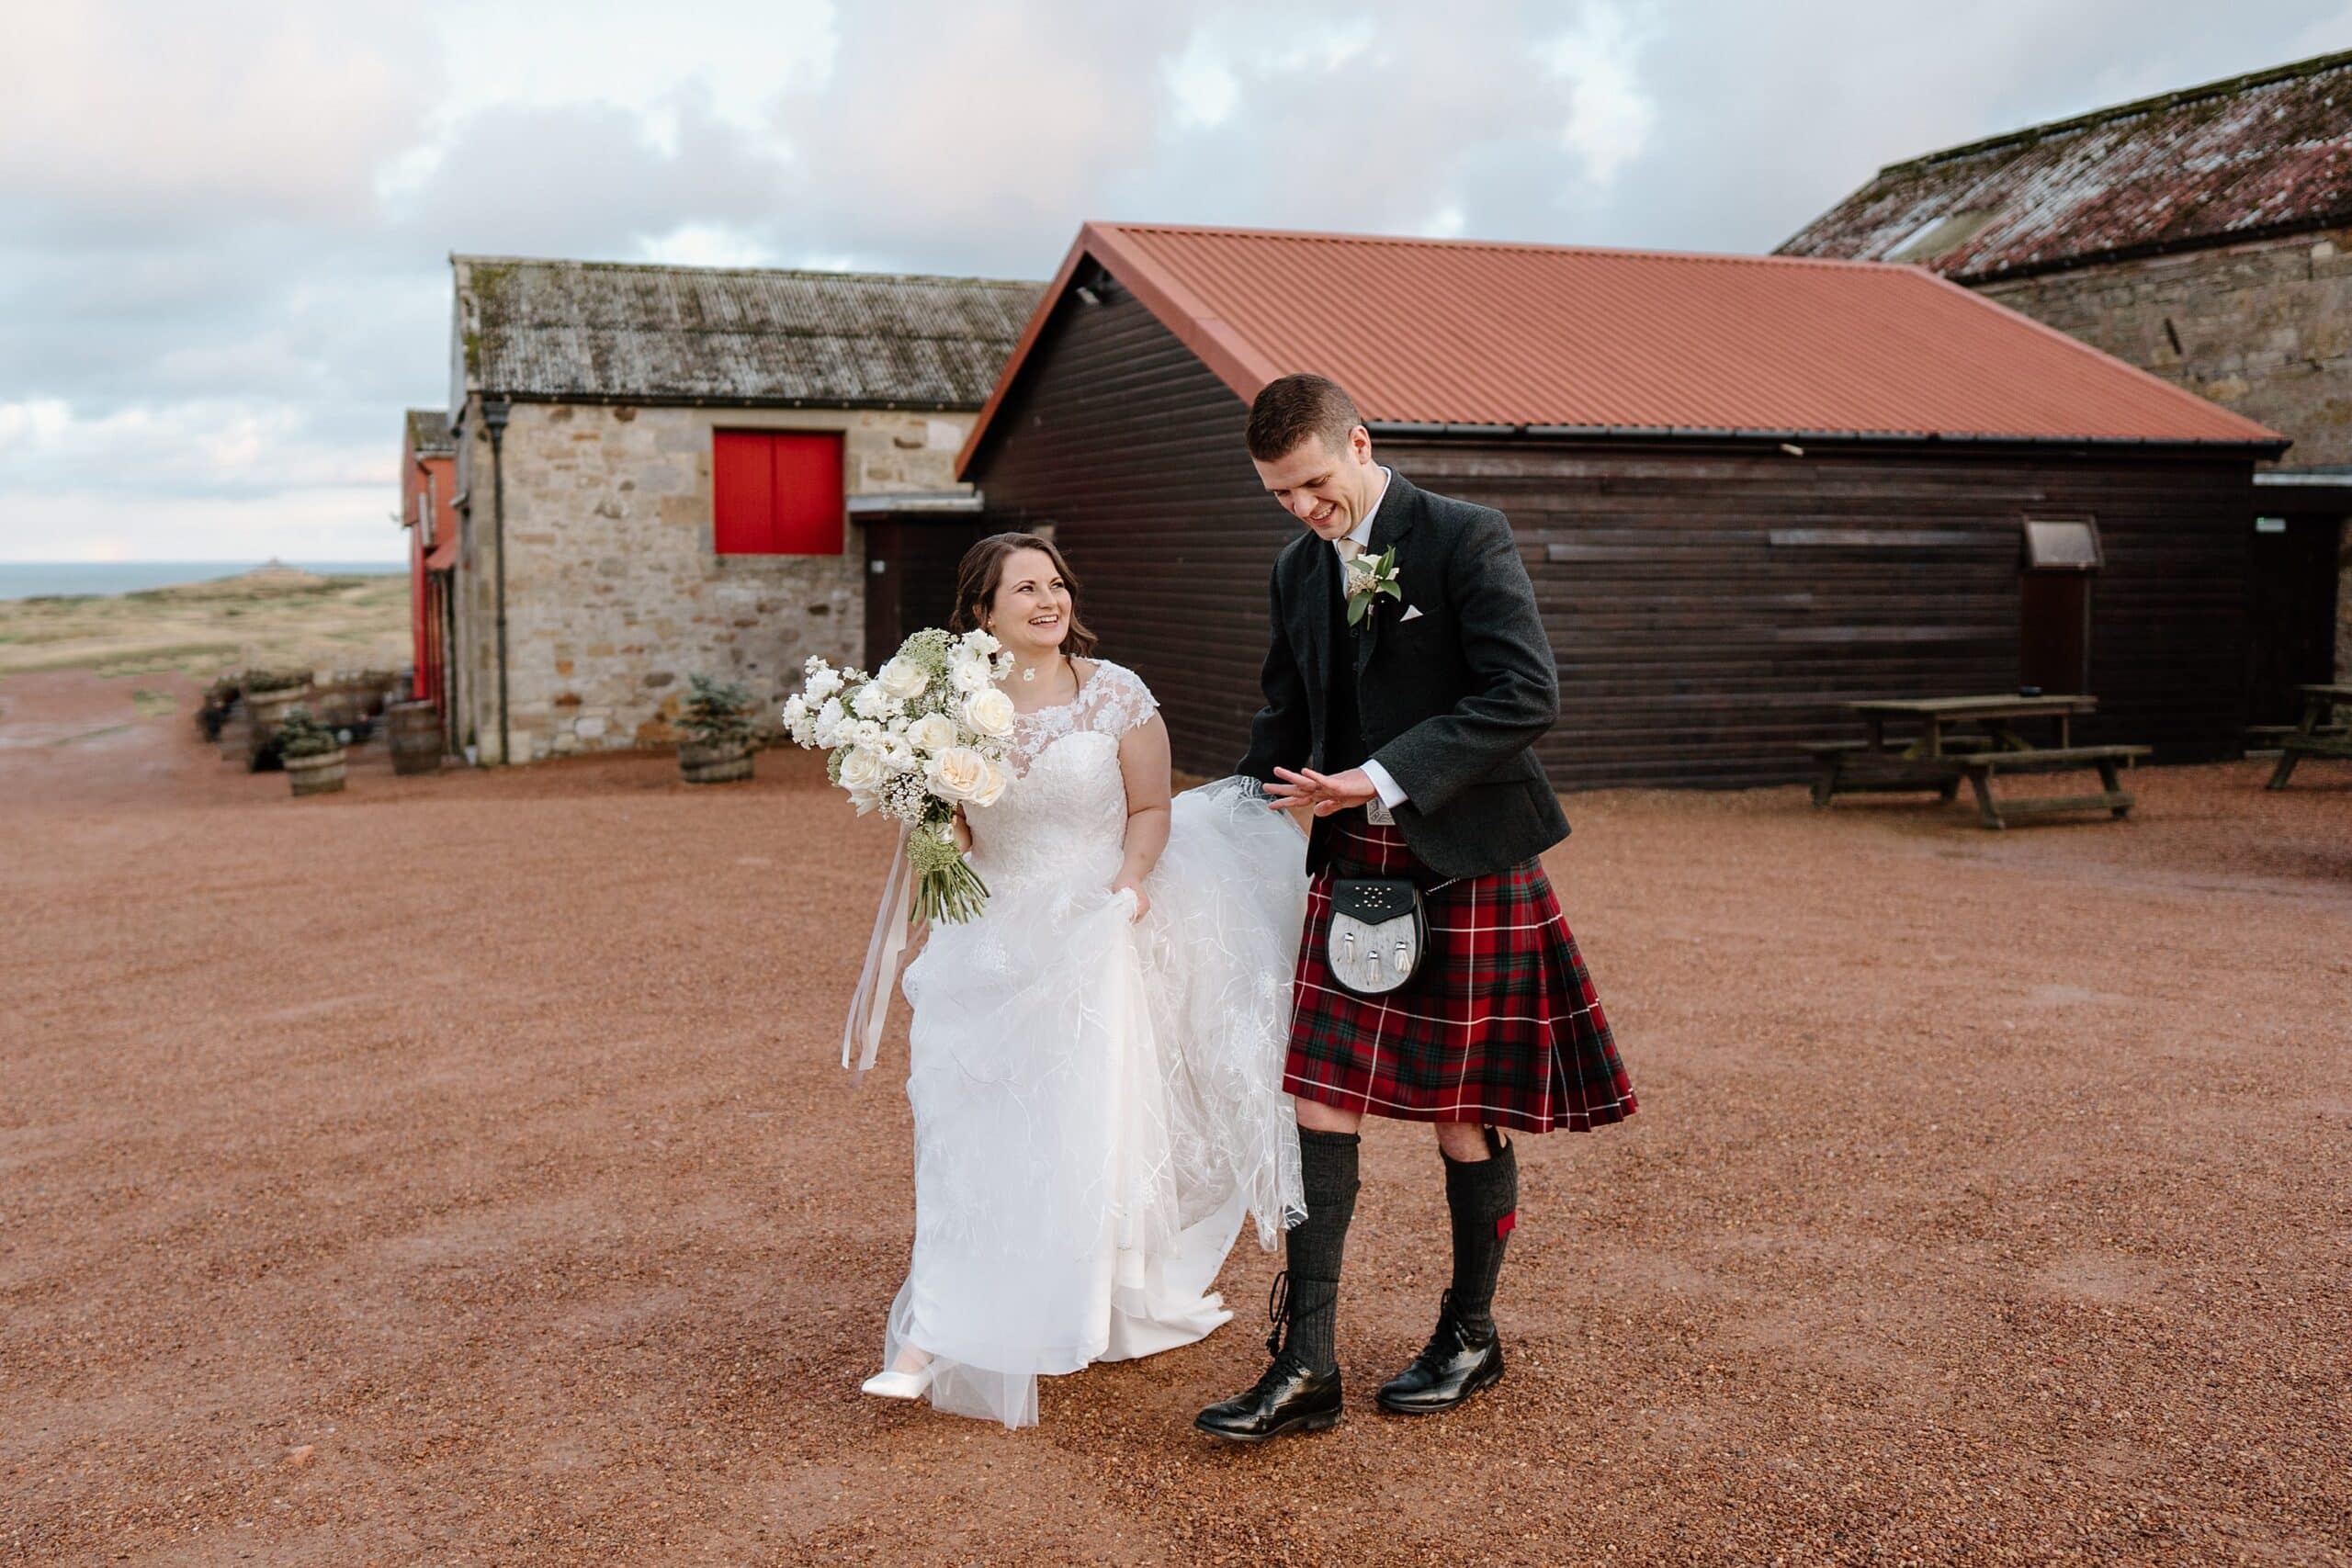 kinkell byre wedding photos exterior outside view of farm barn wedding venue st andrews scotland bride and groom walking away from venue